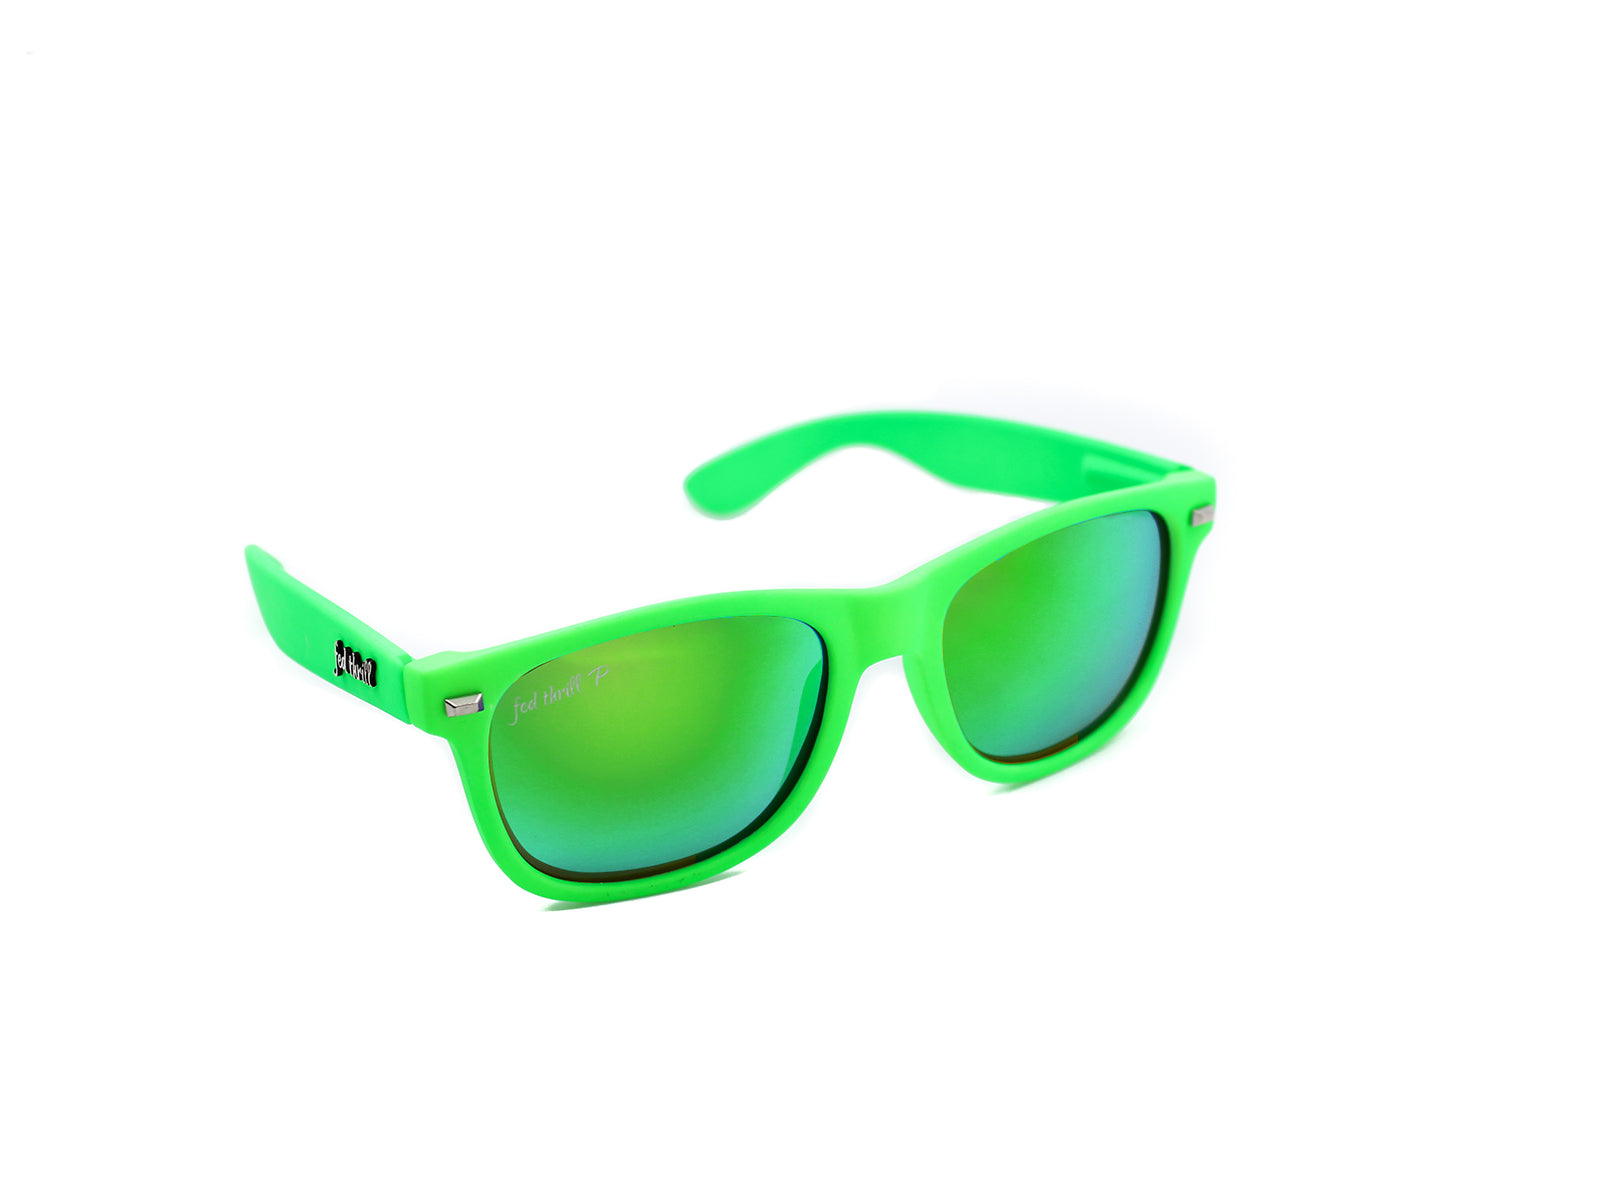 Fultons - Ryleighs: Matte Neon Green / Mirrored Green Polarized